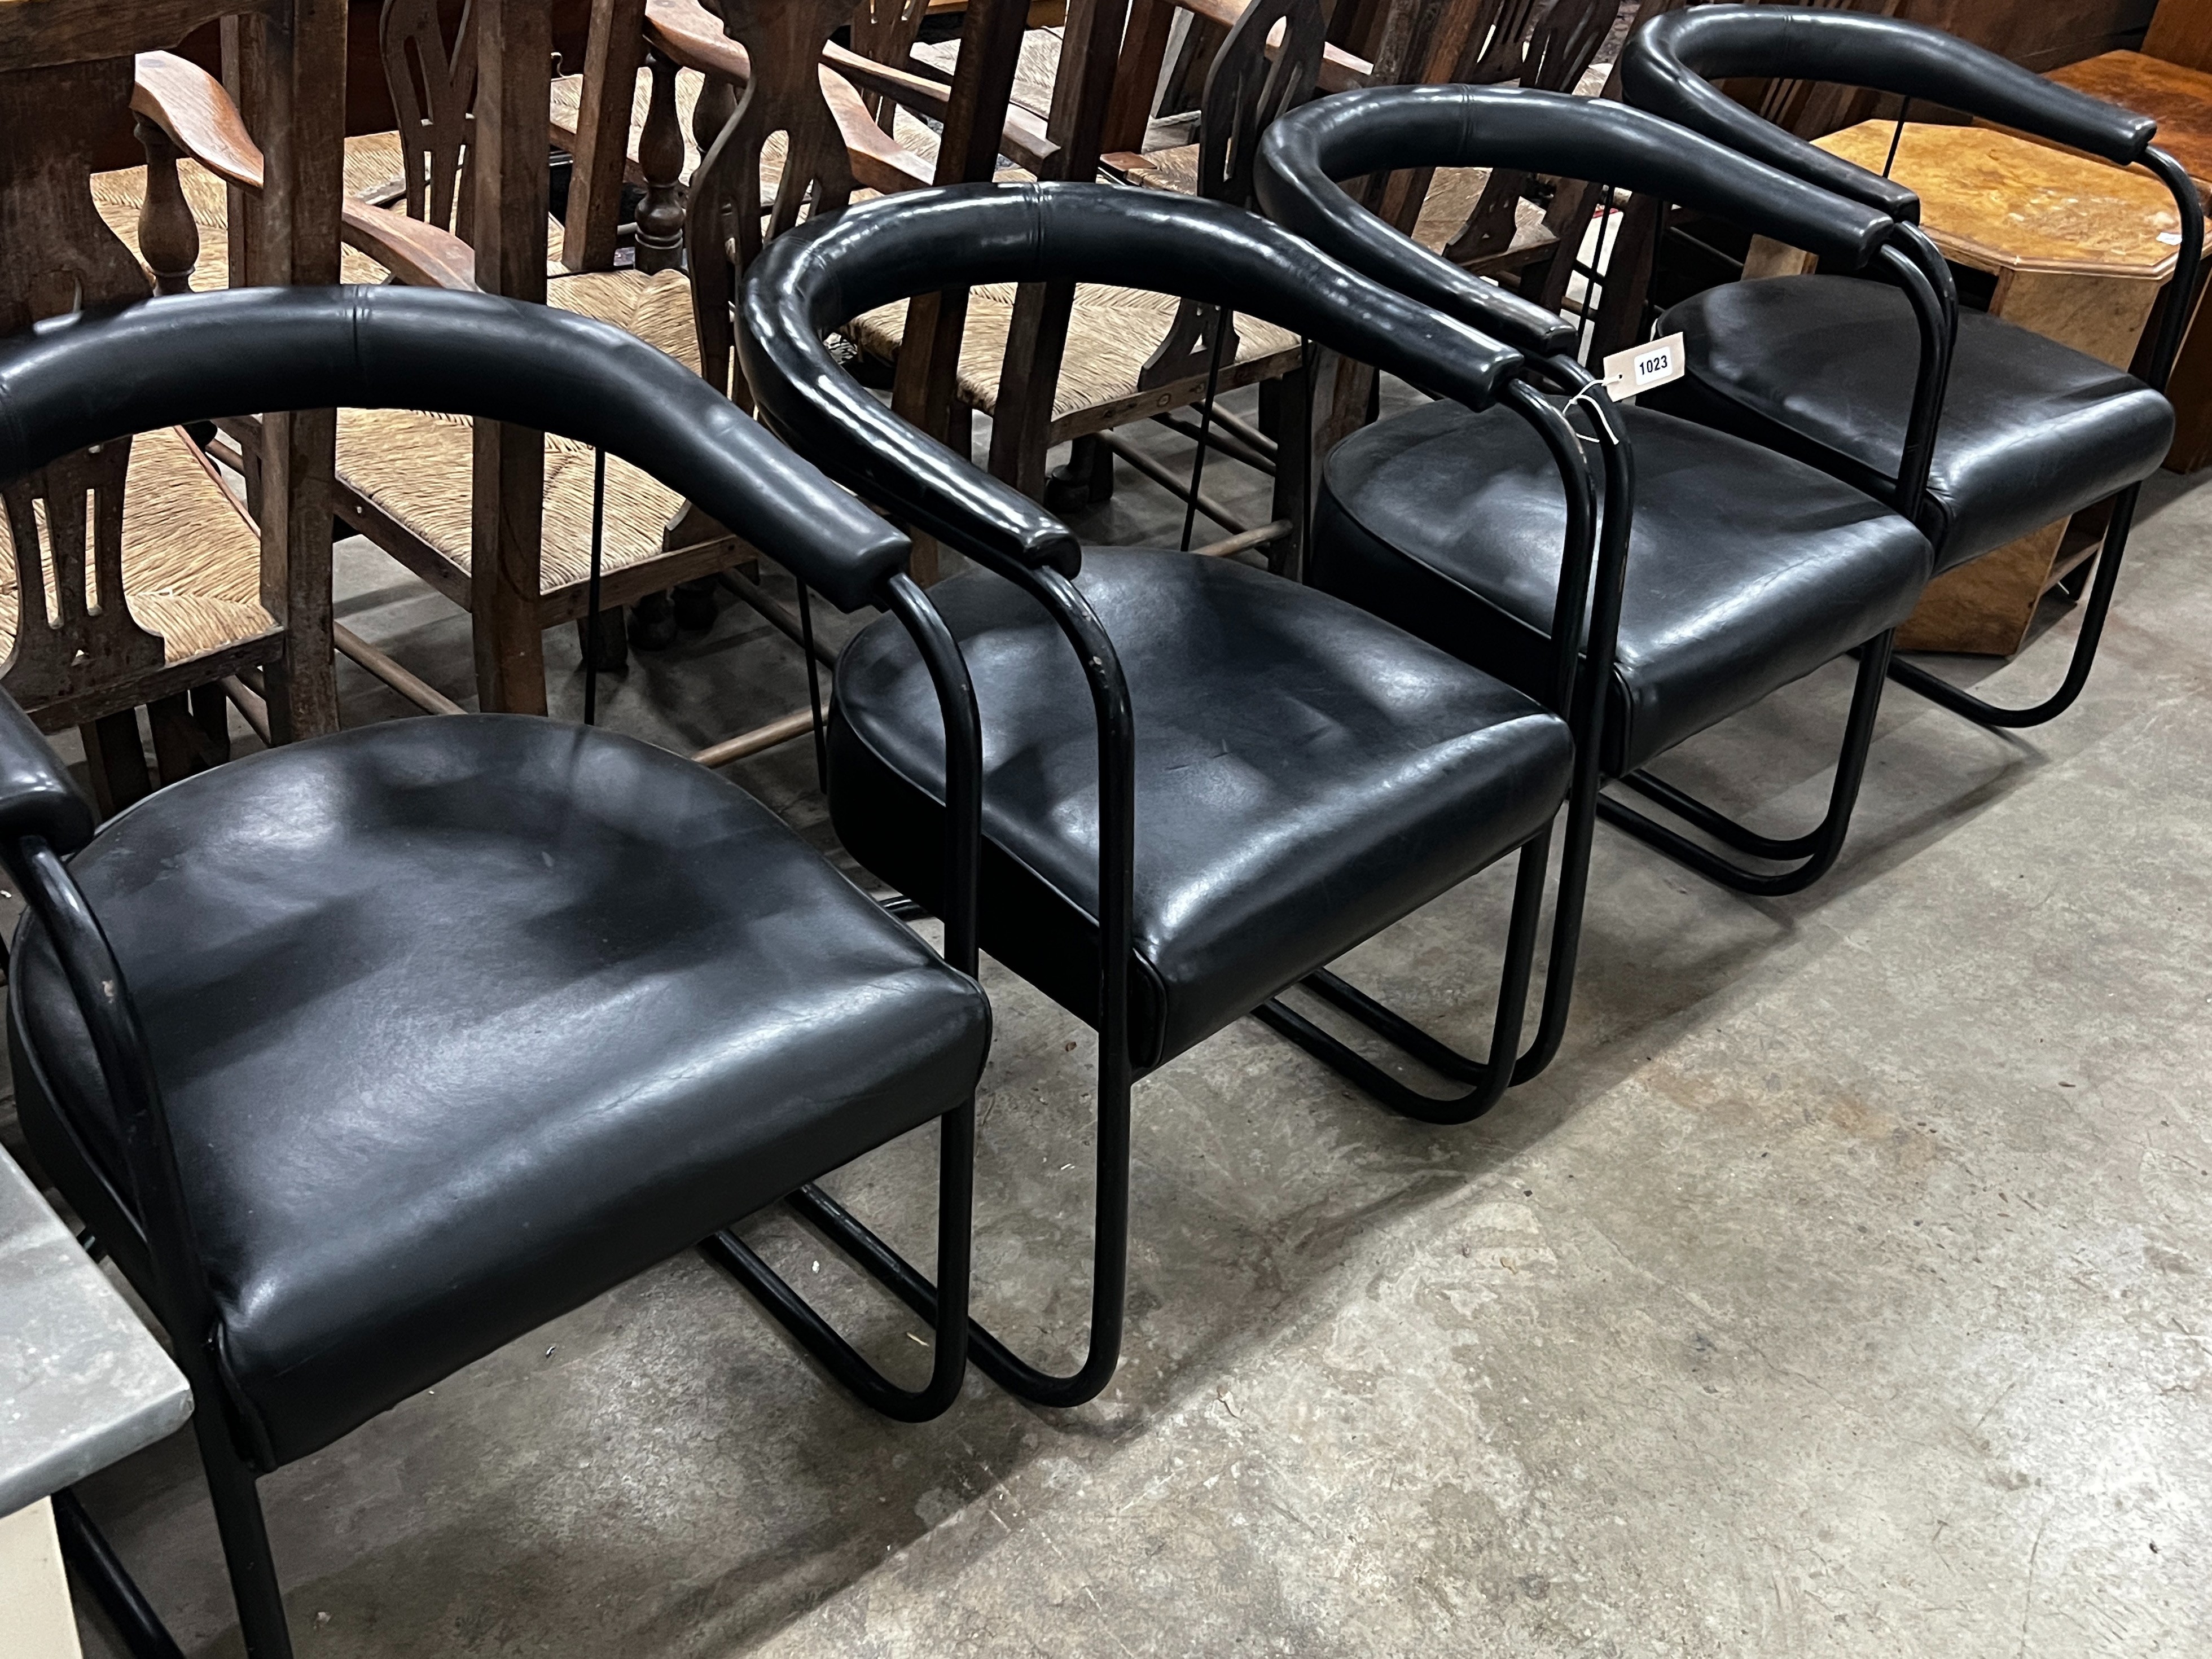 Four cantilever tub chairs by Oliver Percy Bernard, width 54cm, depth 60cm, height 76cm